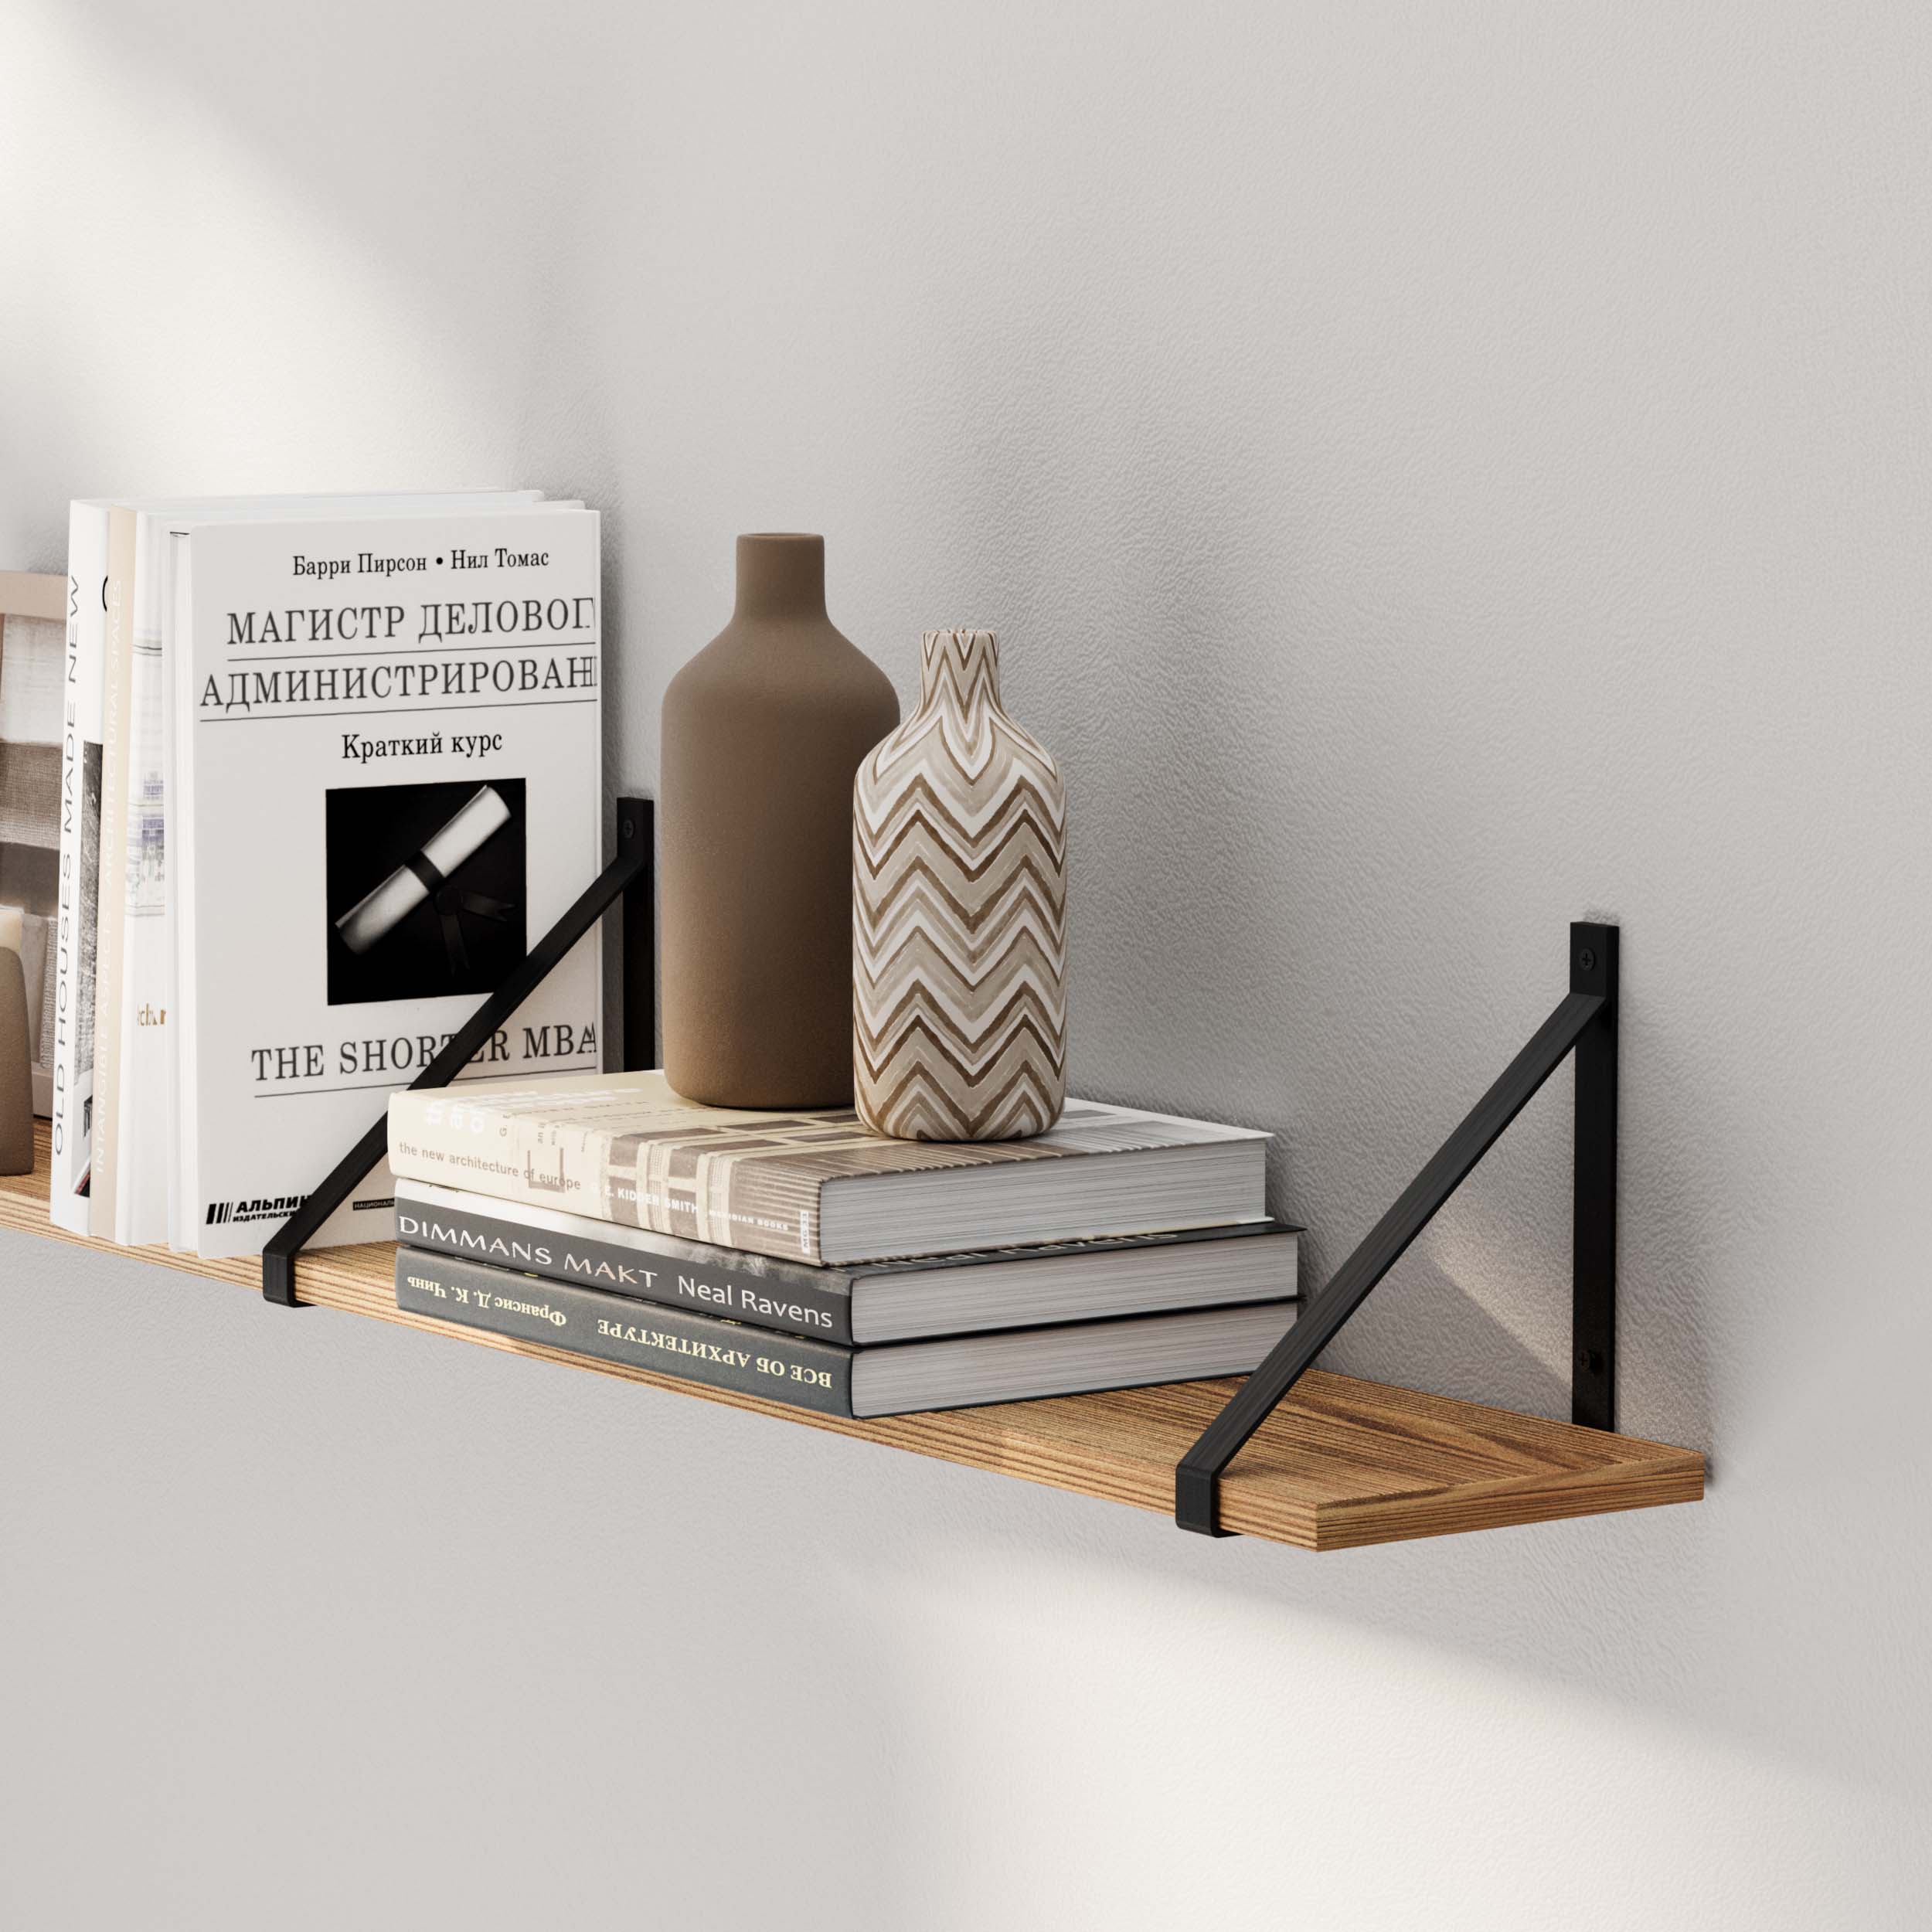 Minimalist rustic shelf burnt with books and elegant vases, against a textured wall.